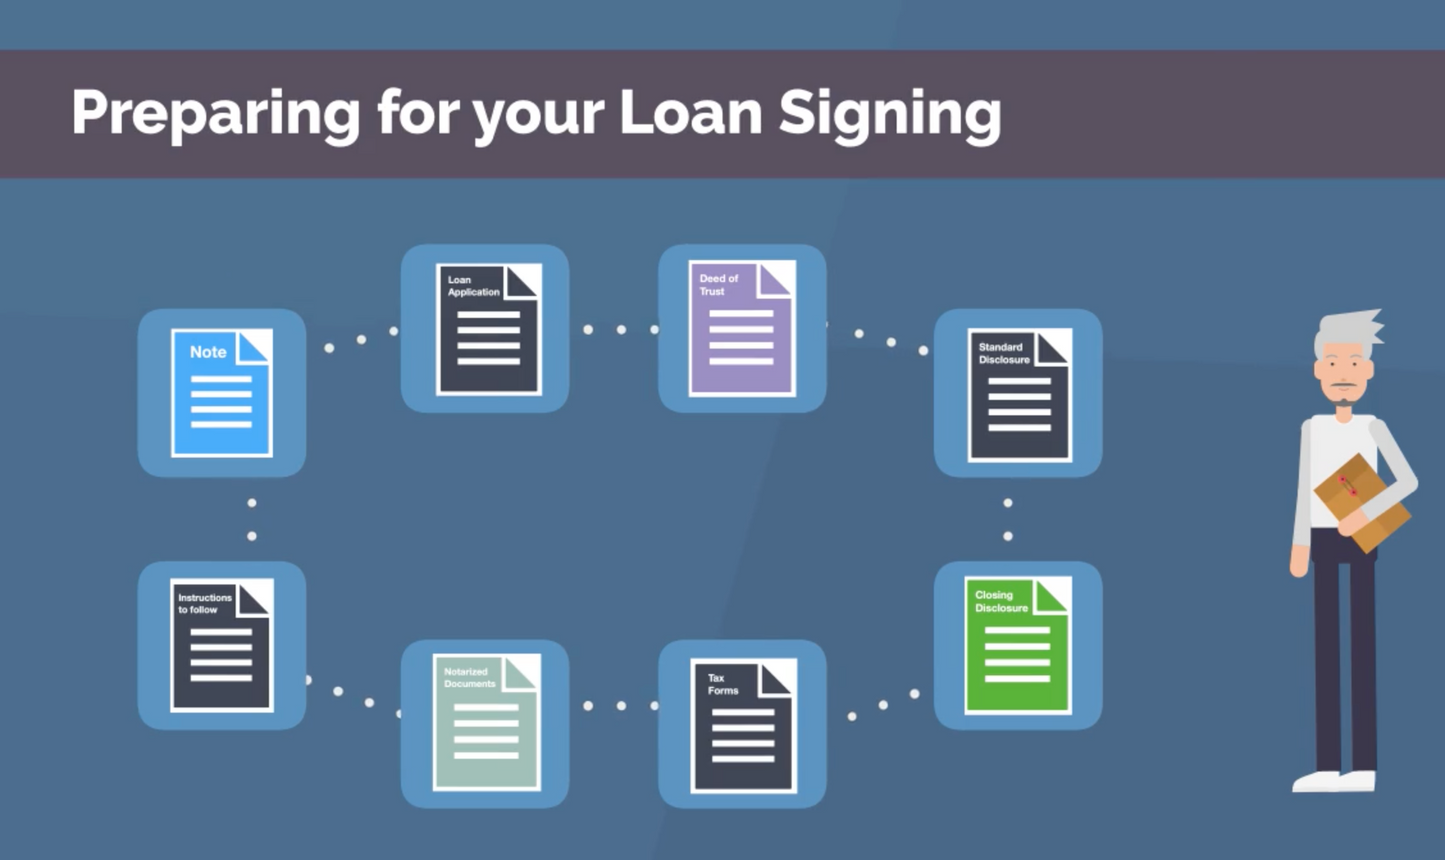 Loan Signing Intro/Prep for your Signers